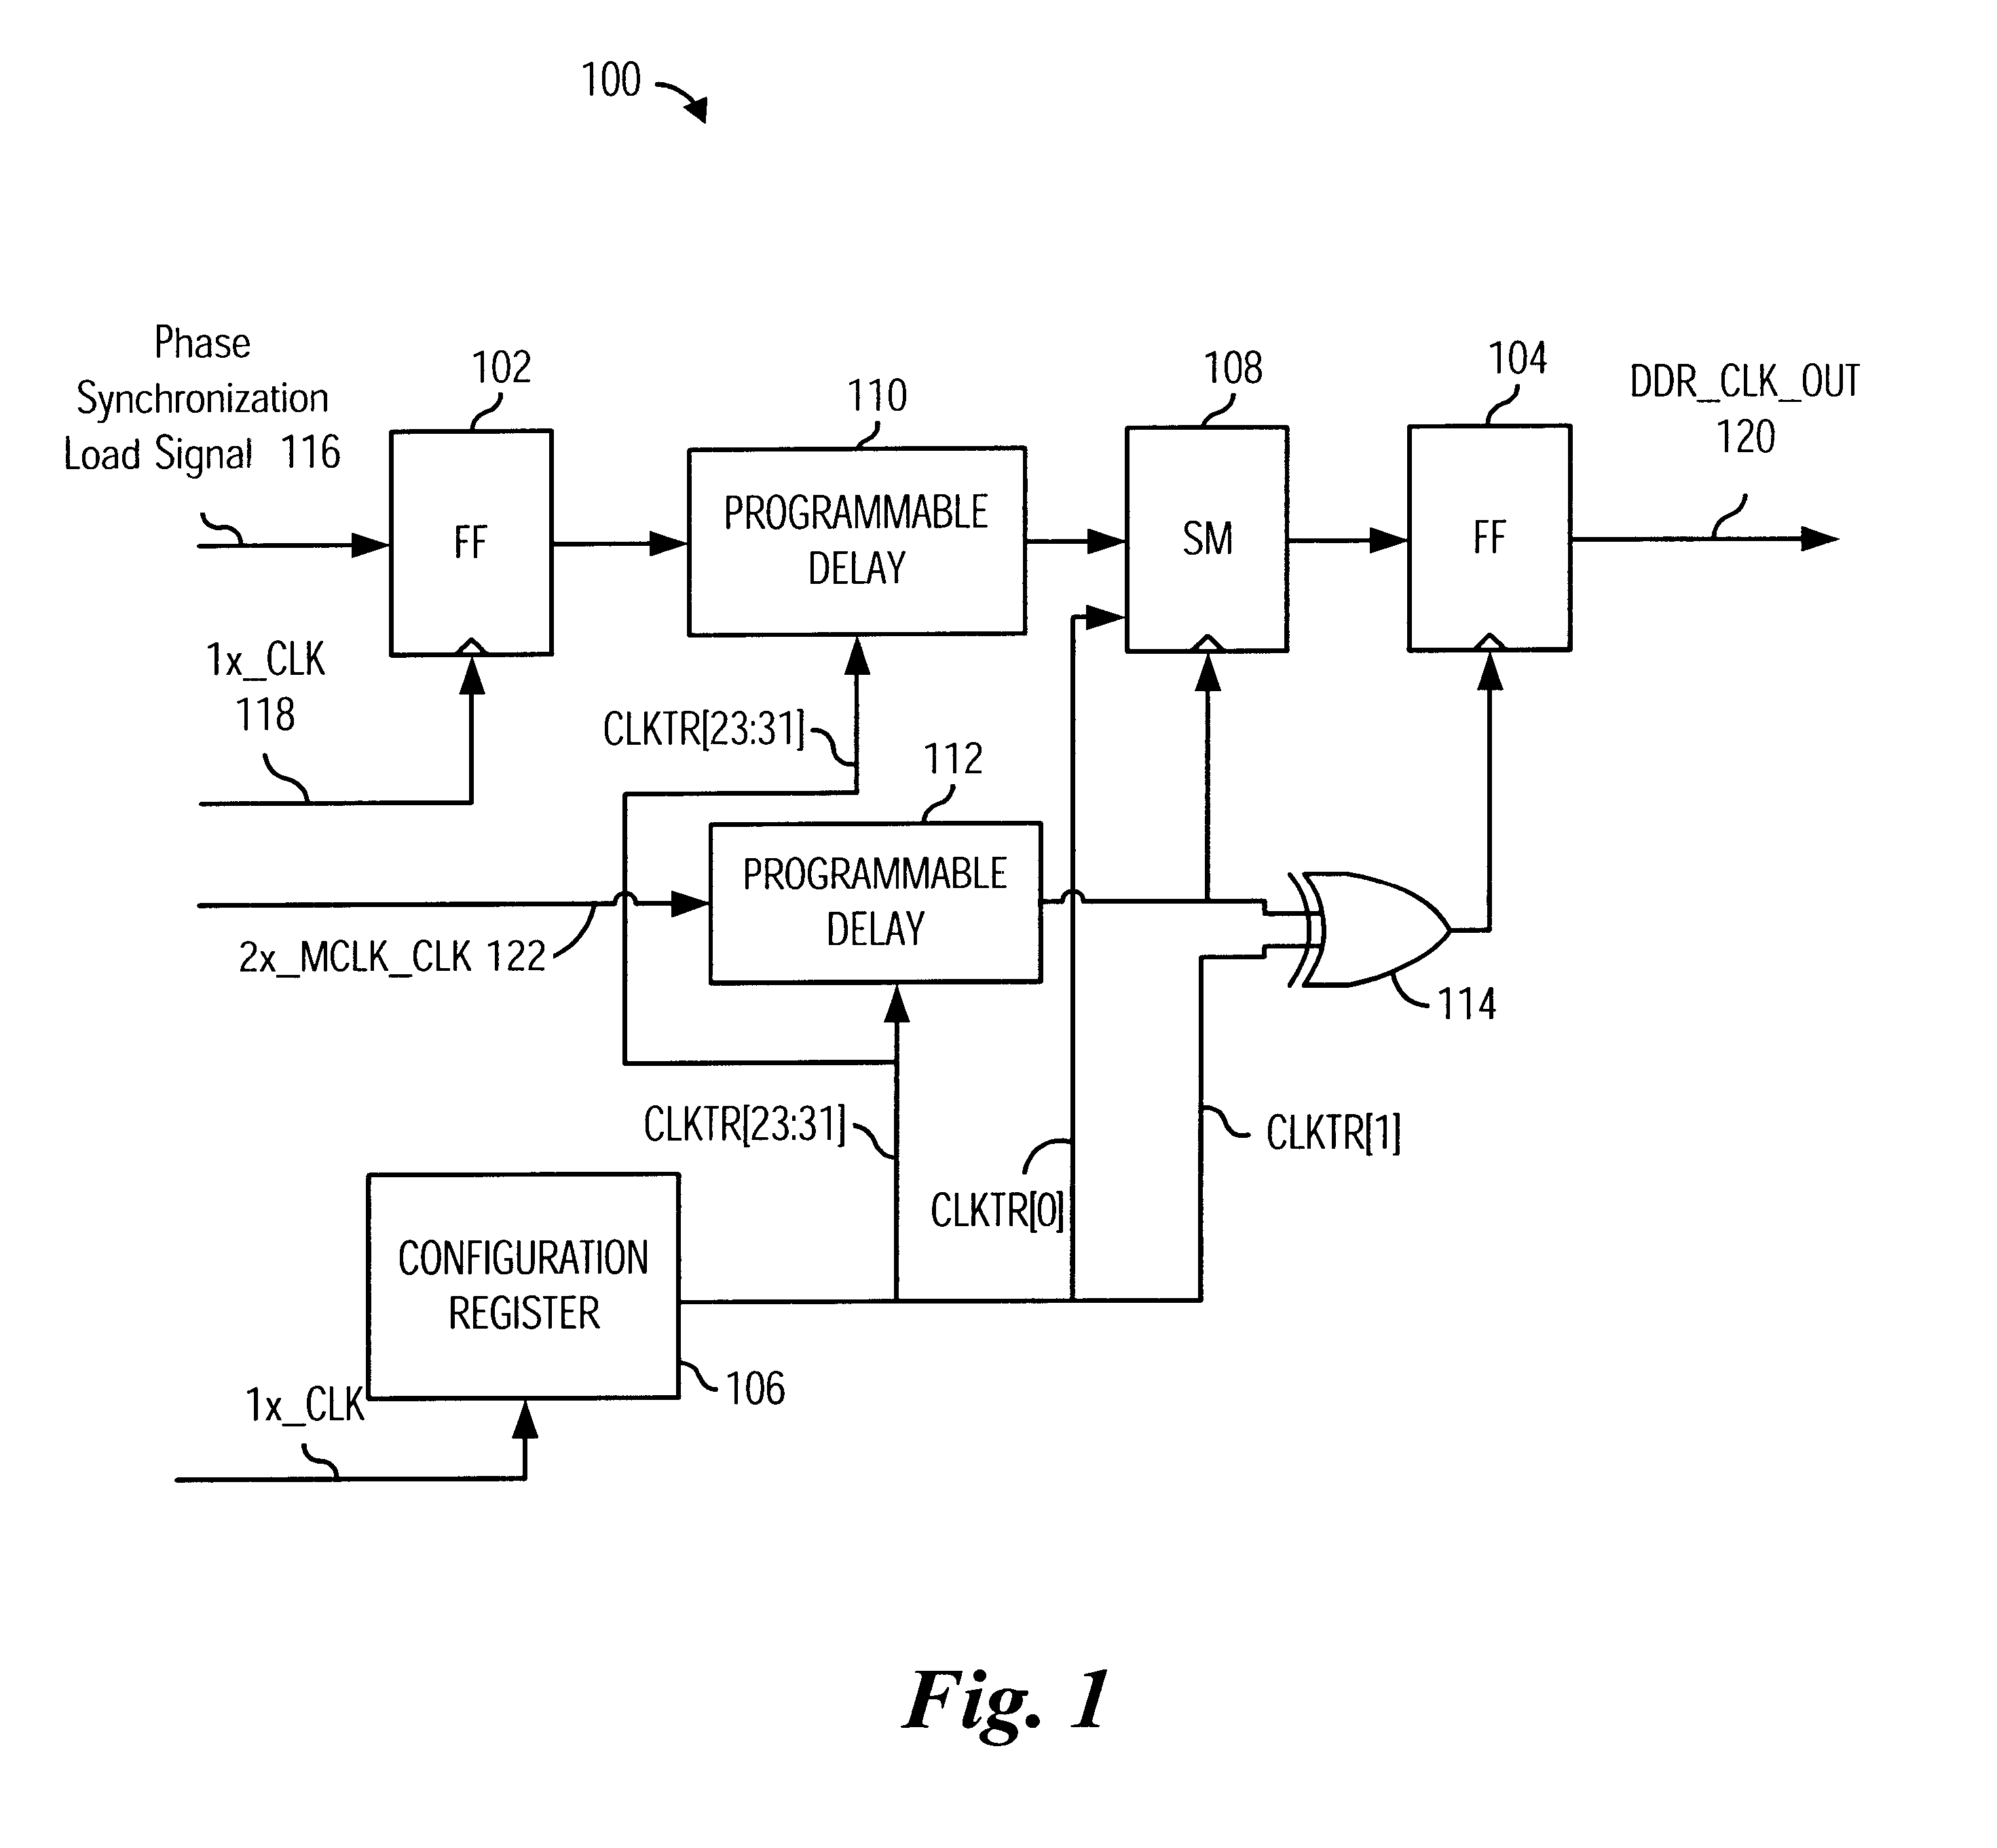 Memory clock generation with configurable phase advance and delay capability